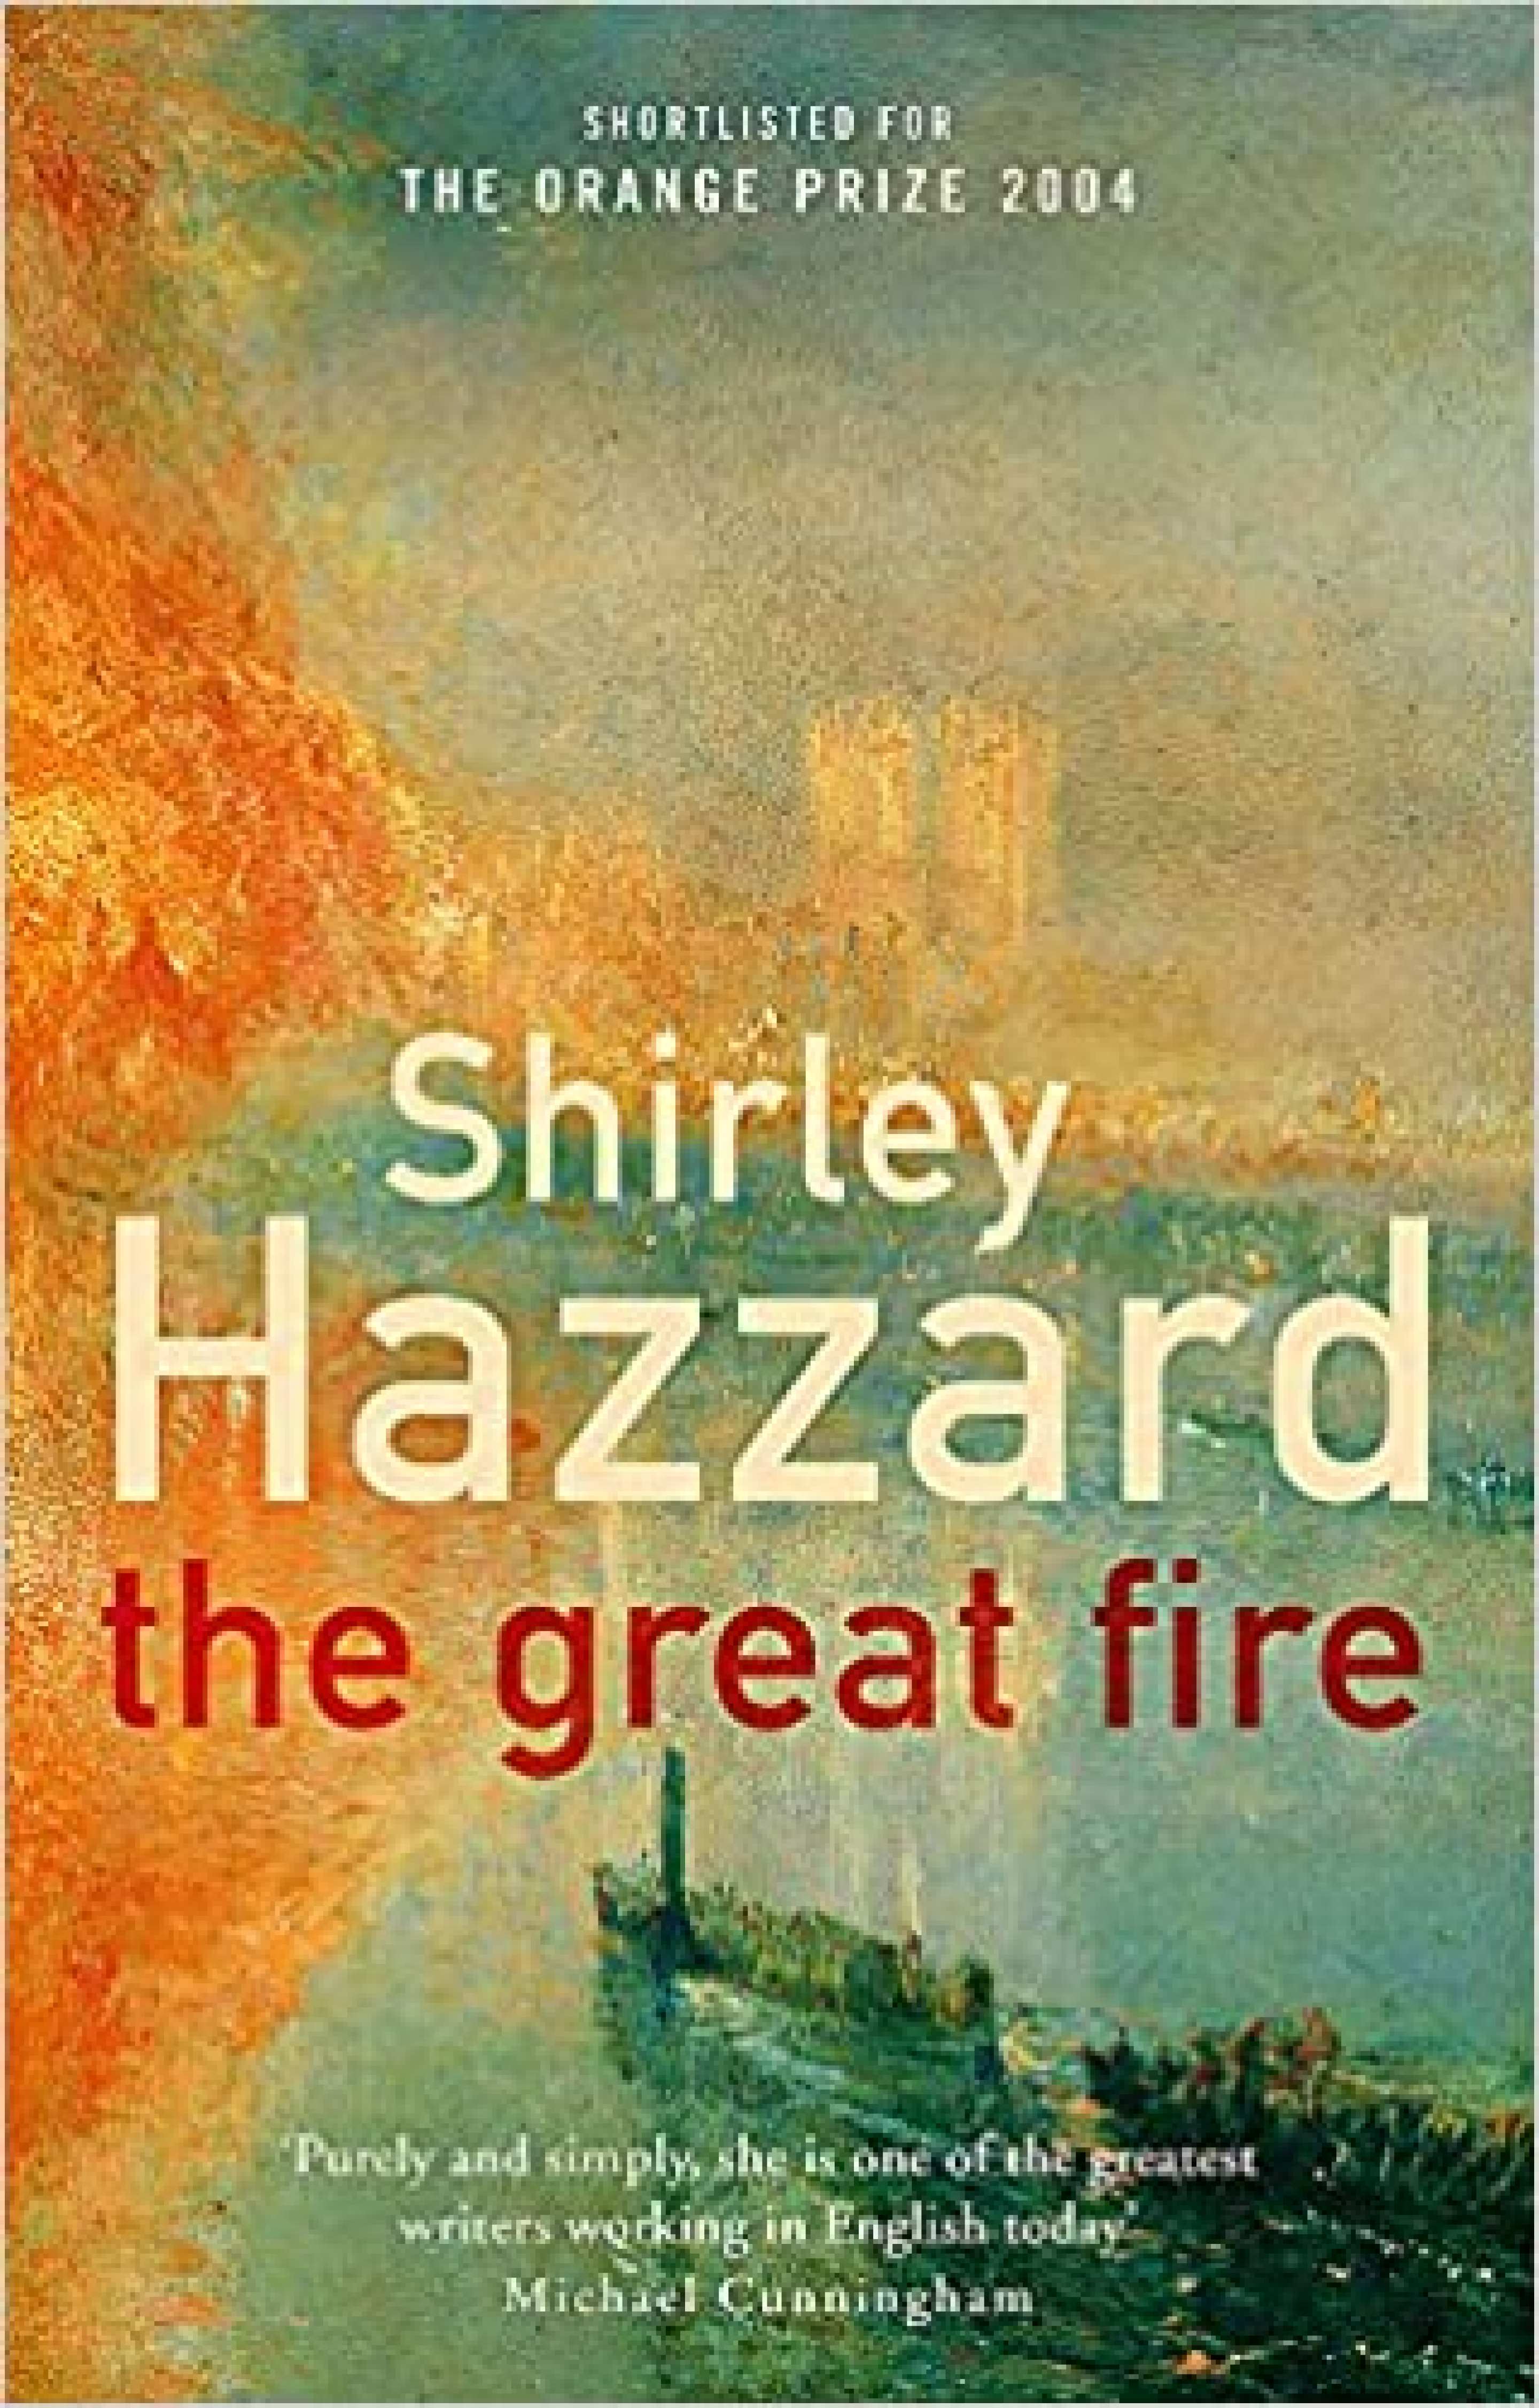 photo of book cover for The Great Fire, it's an illustration of London on fire